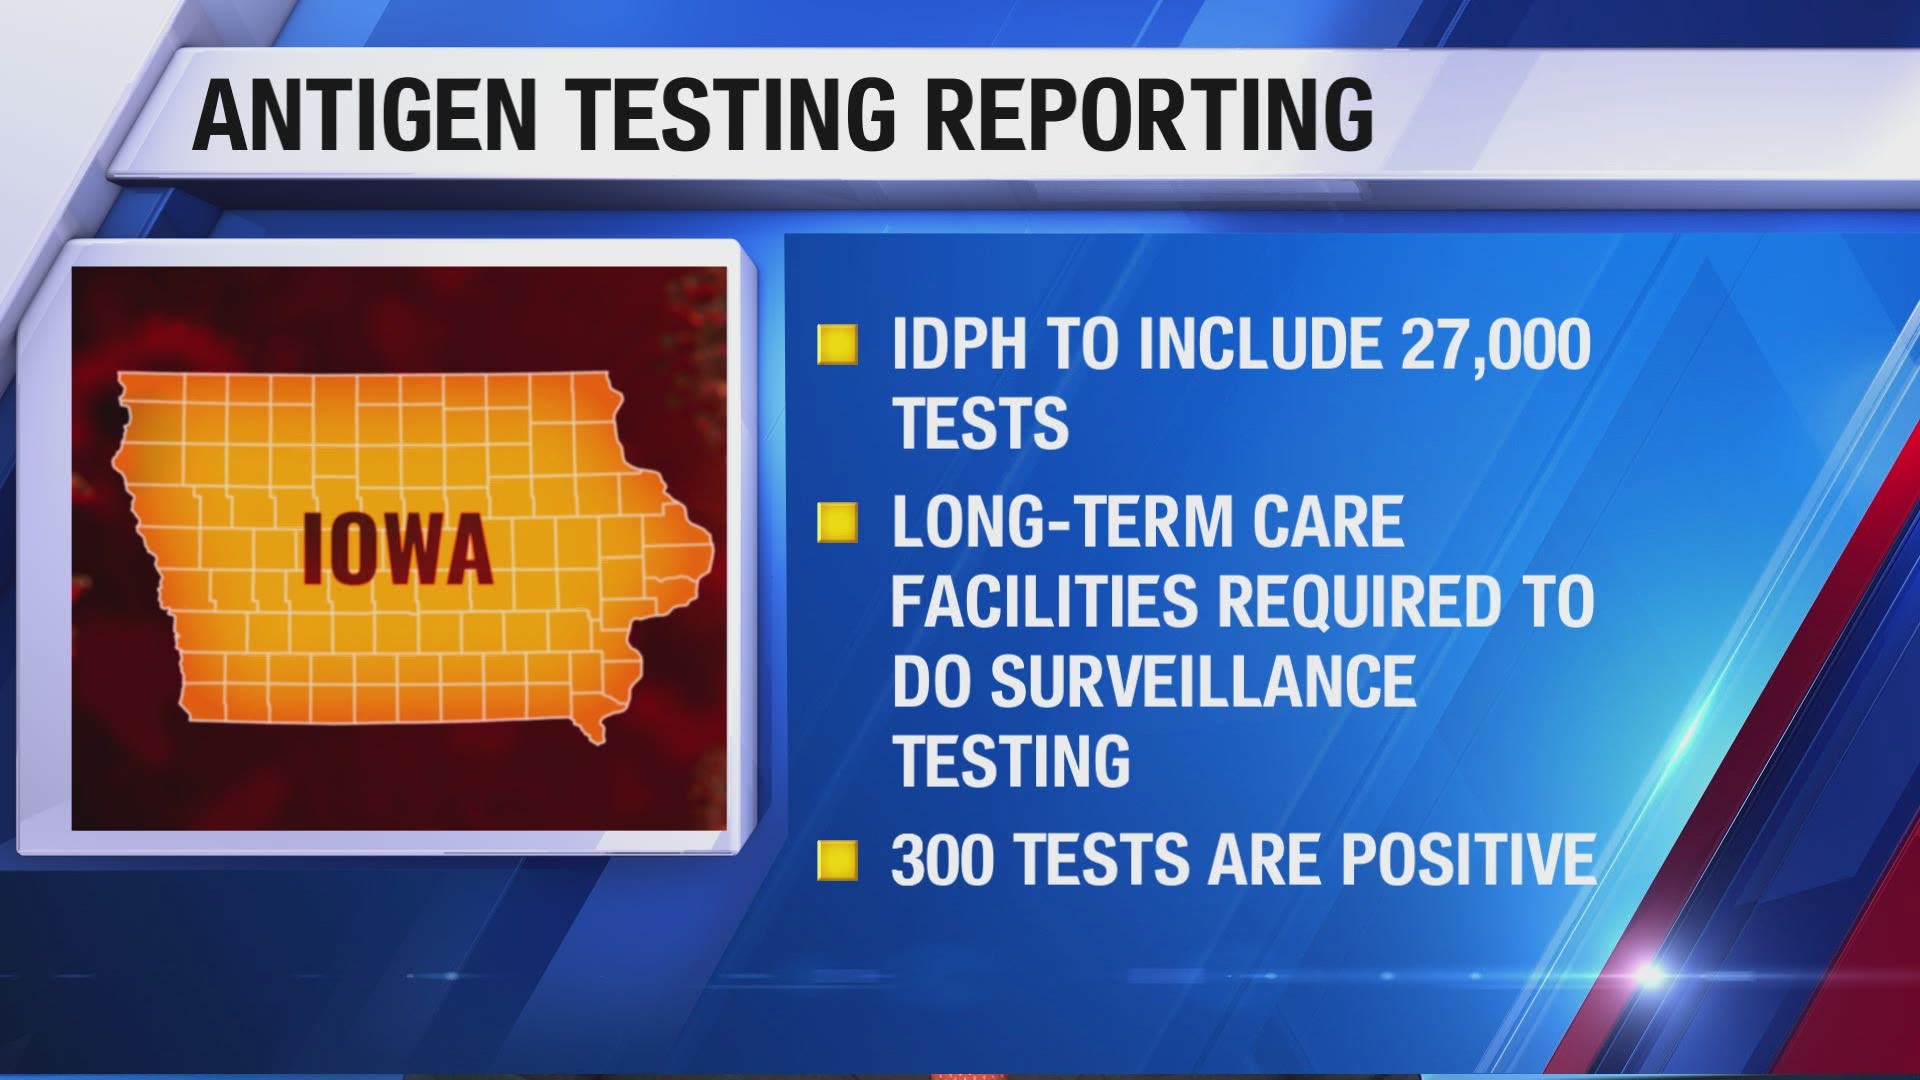 While 27,000 test results will be added to the website, the Iowa Department of Public Health says only 300 are positive test results.